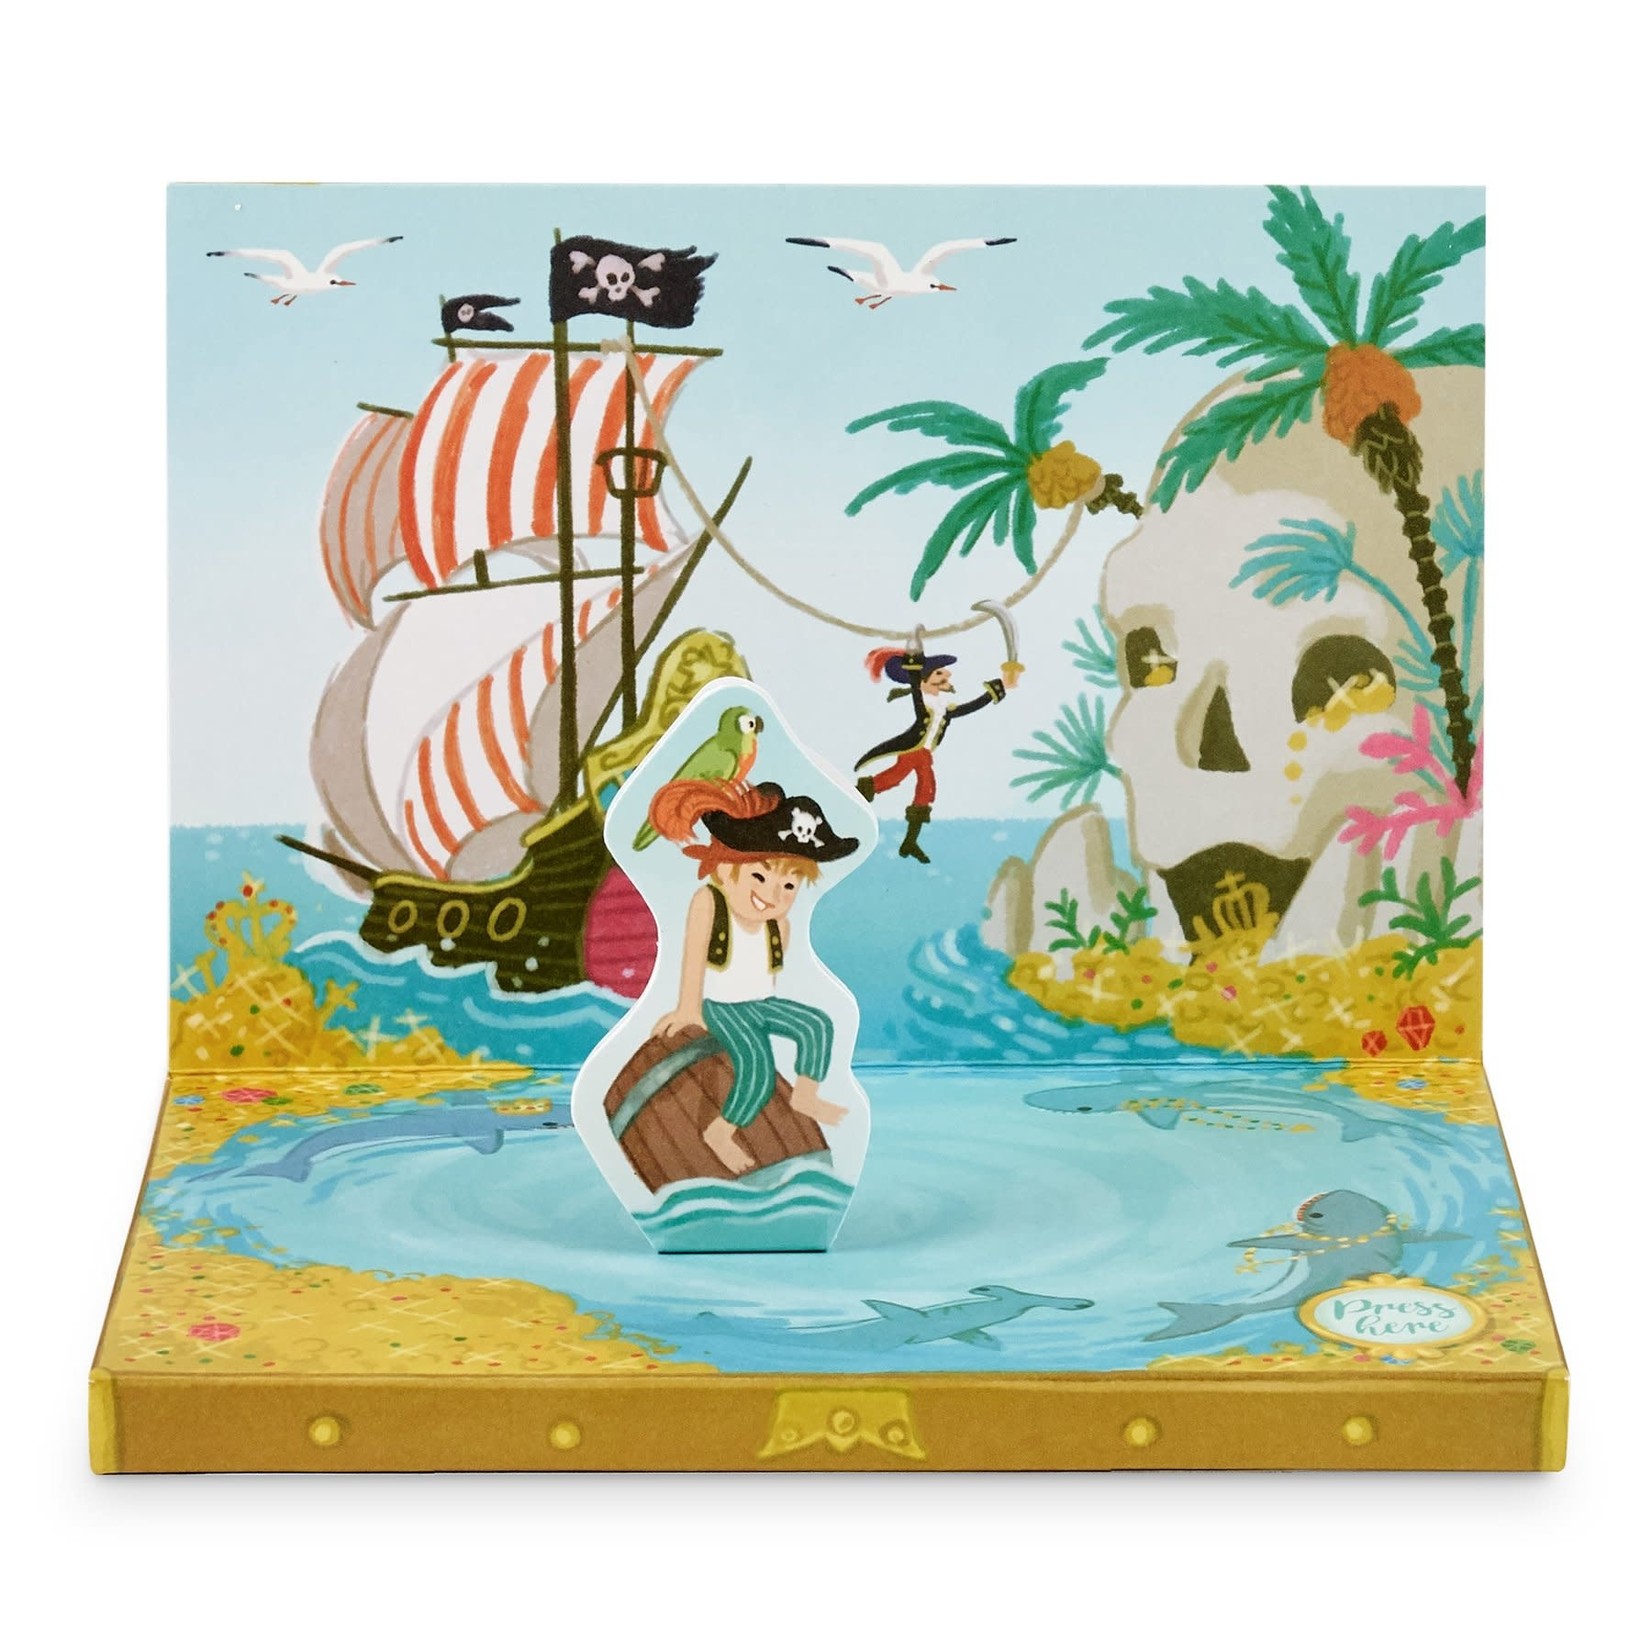 Pirate Adventures Moving Musical Box Card